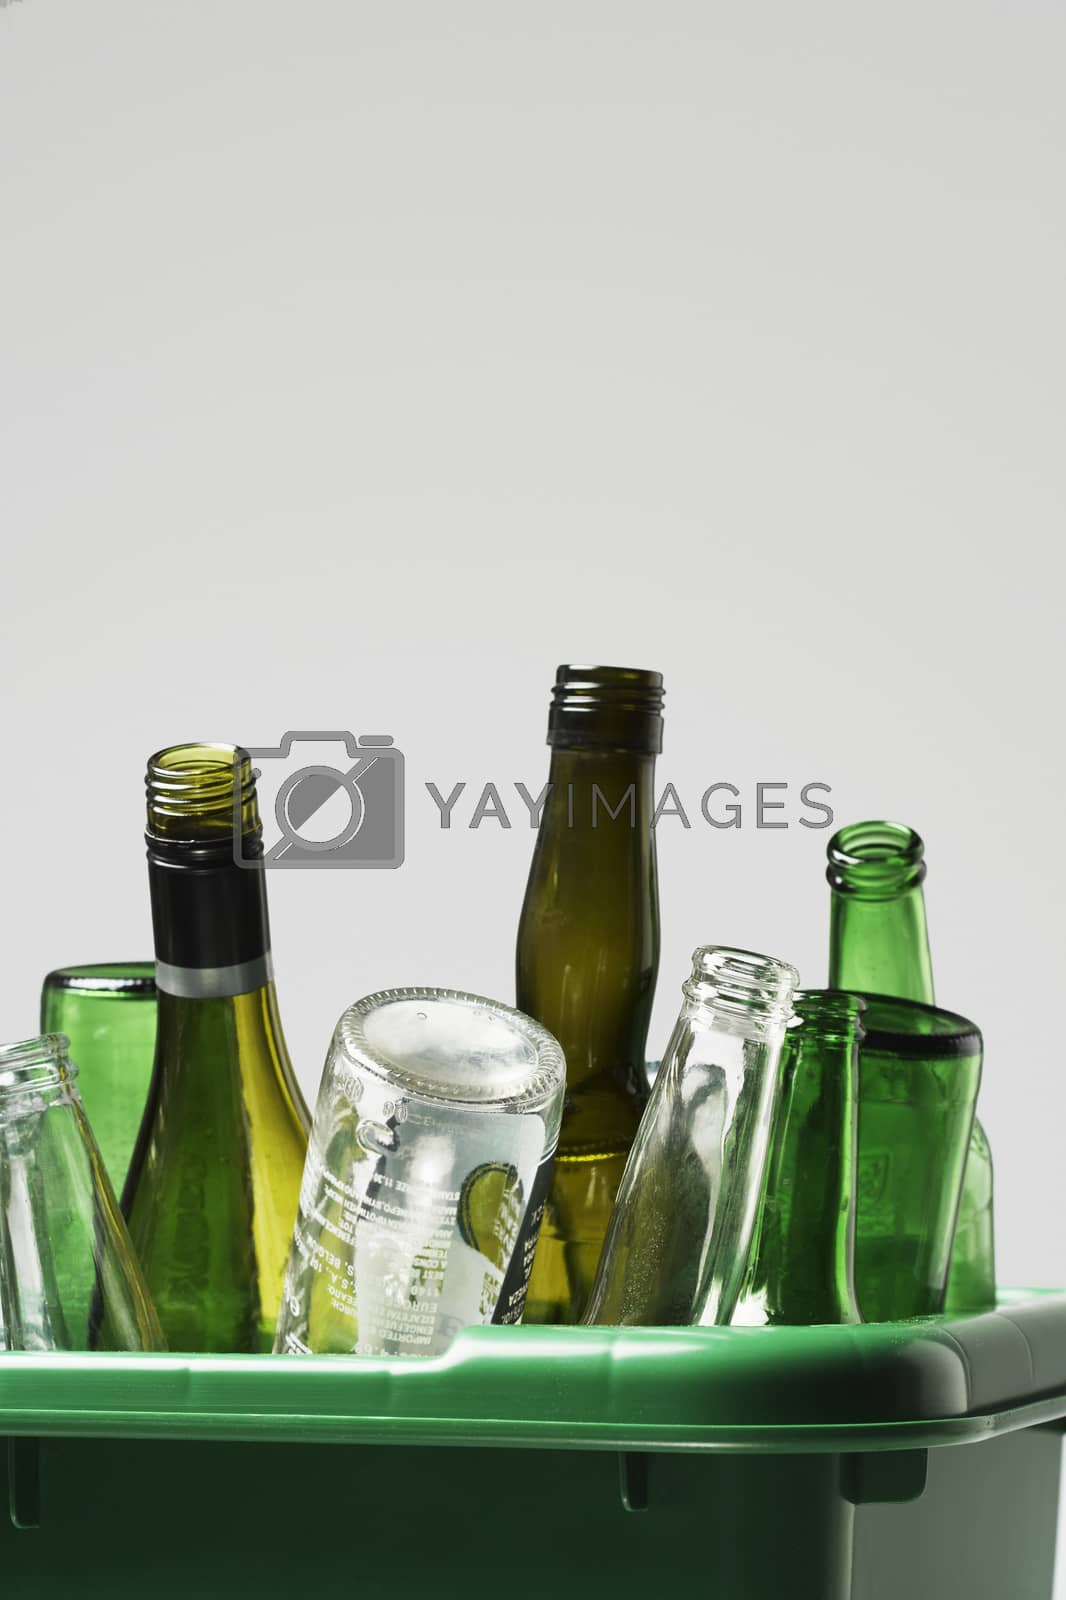 Royalty free image of Empty bottles in green container by moodboard